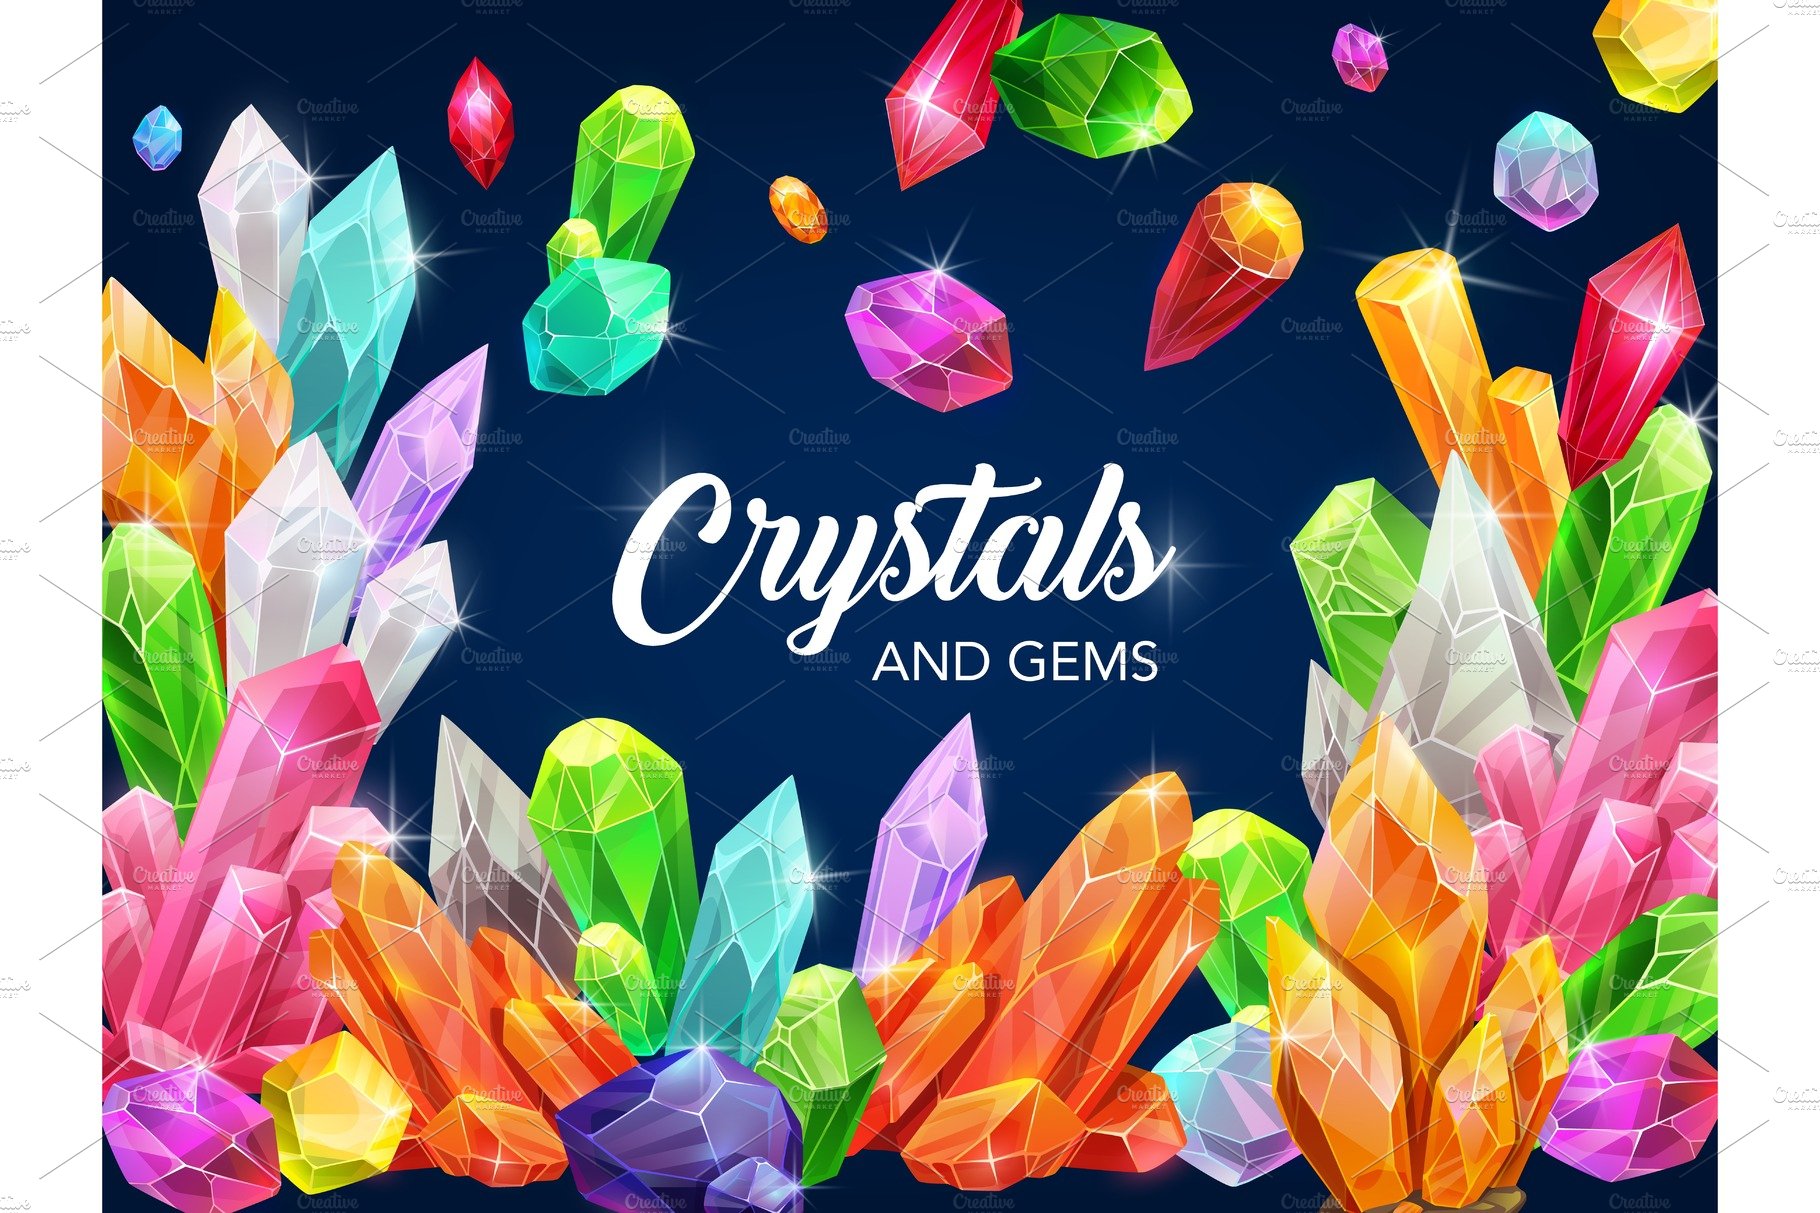 Sparkling crystals and gemstones cover image.